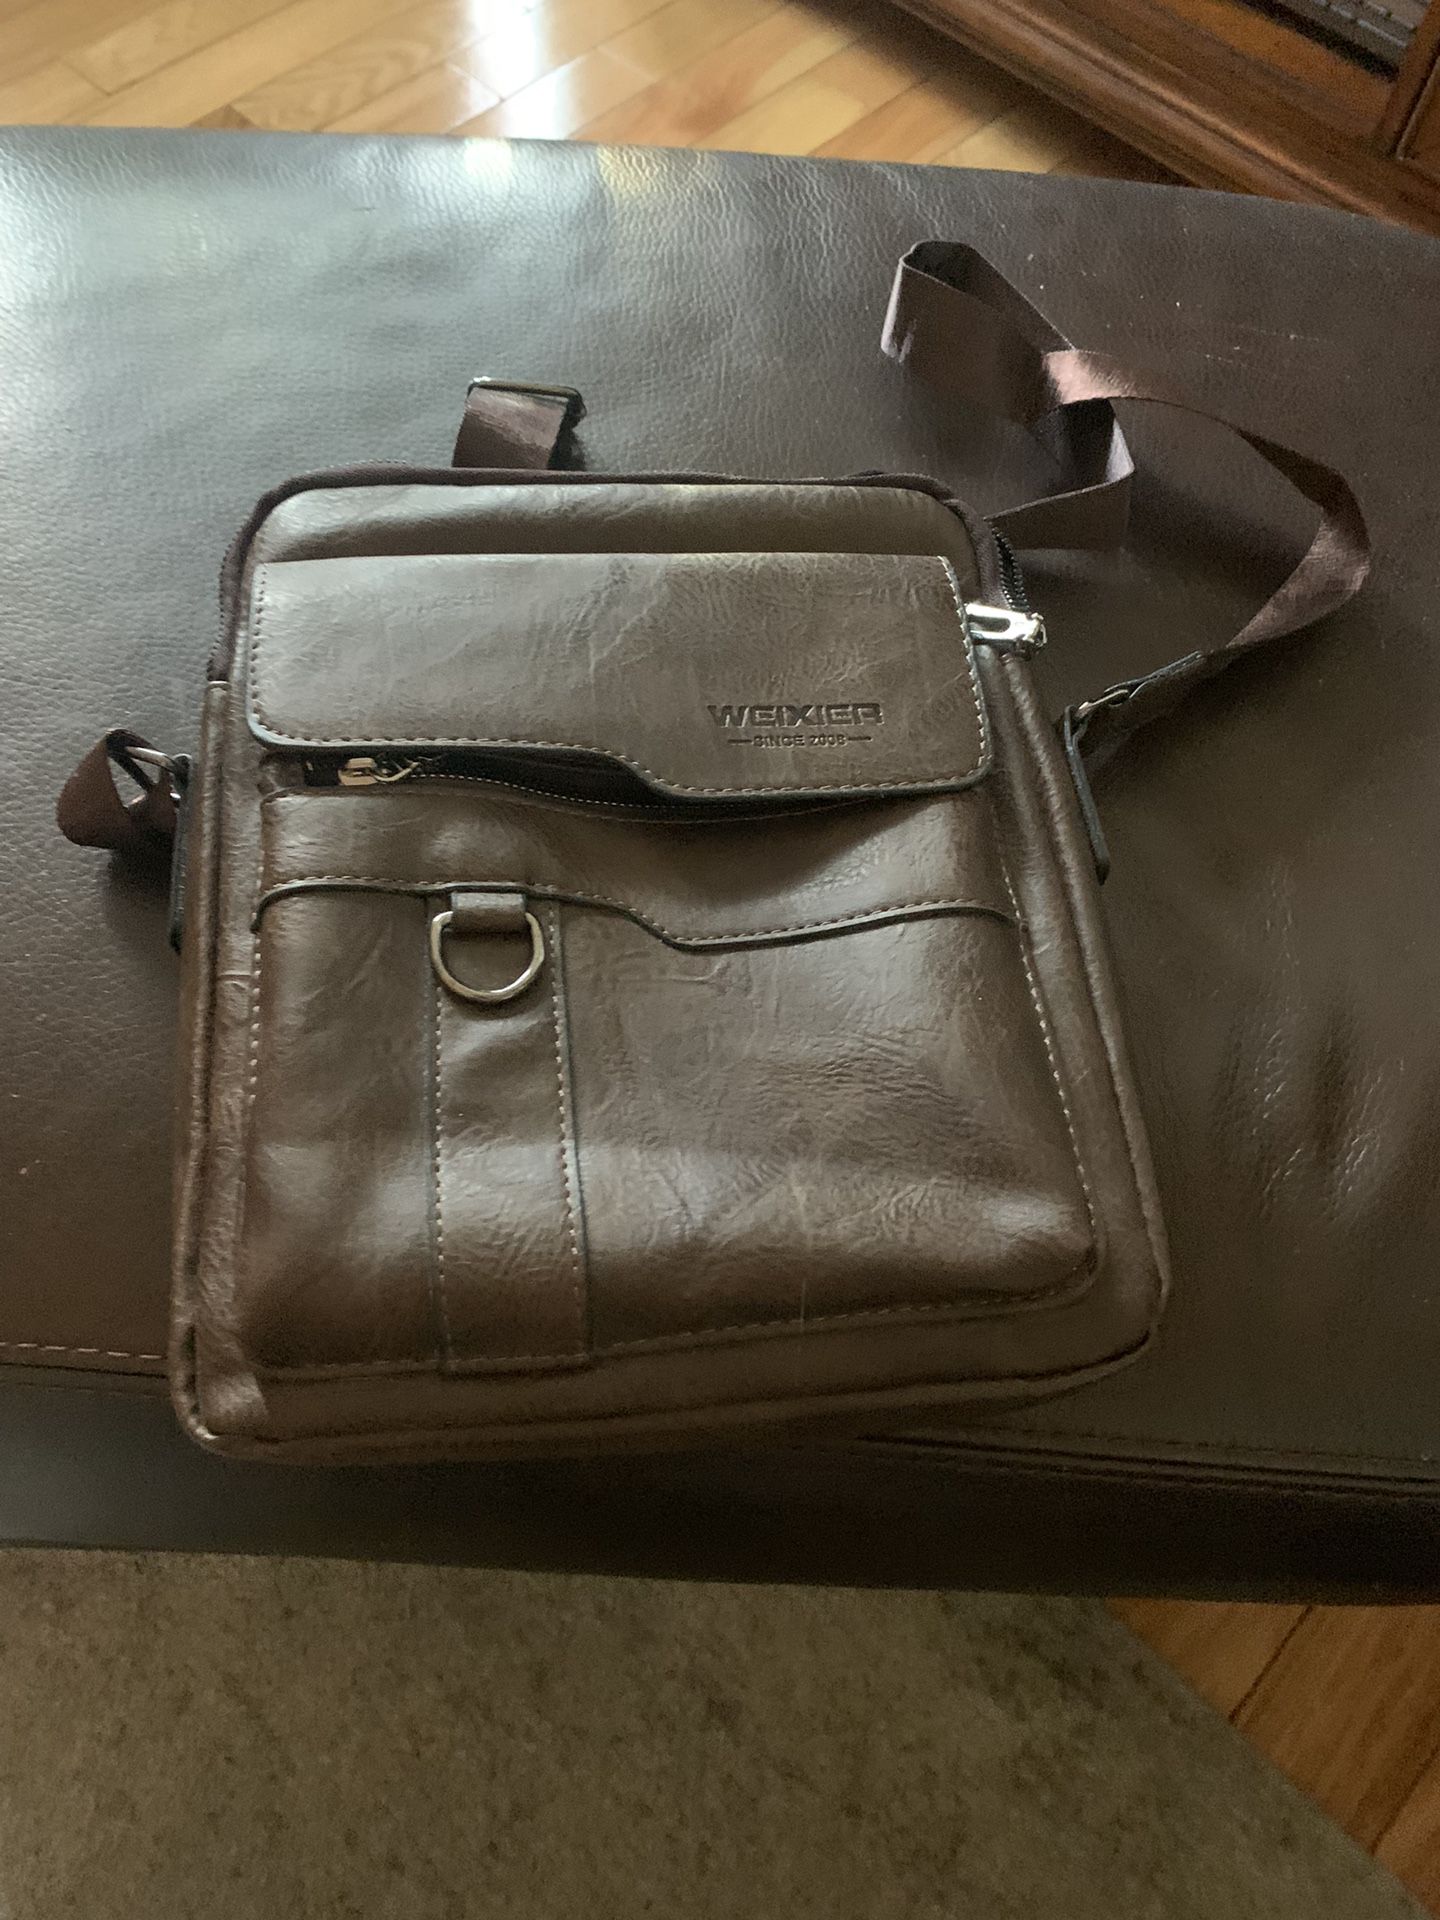 Small Leather Shoulder Bag     Men  Or Woman 